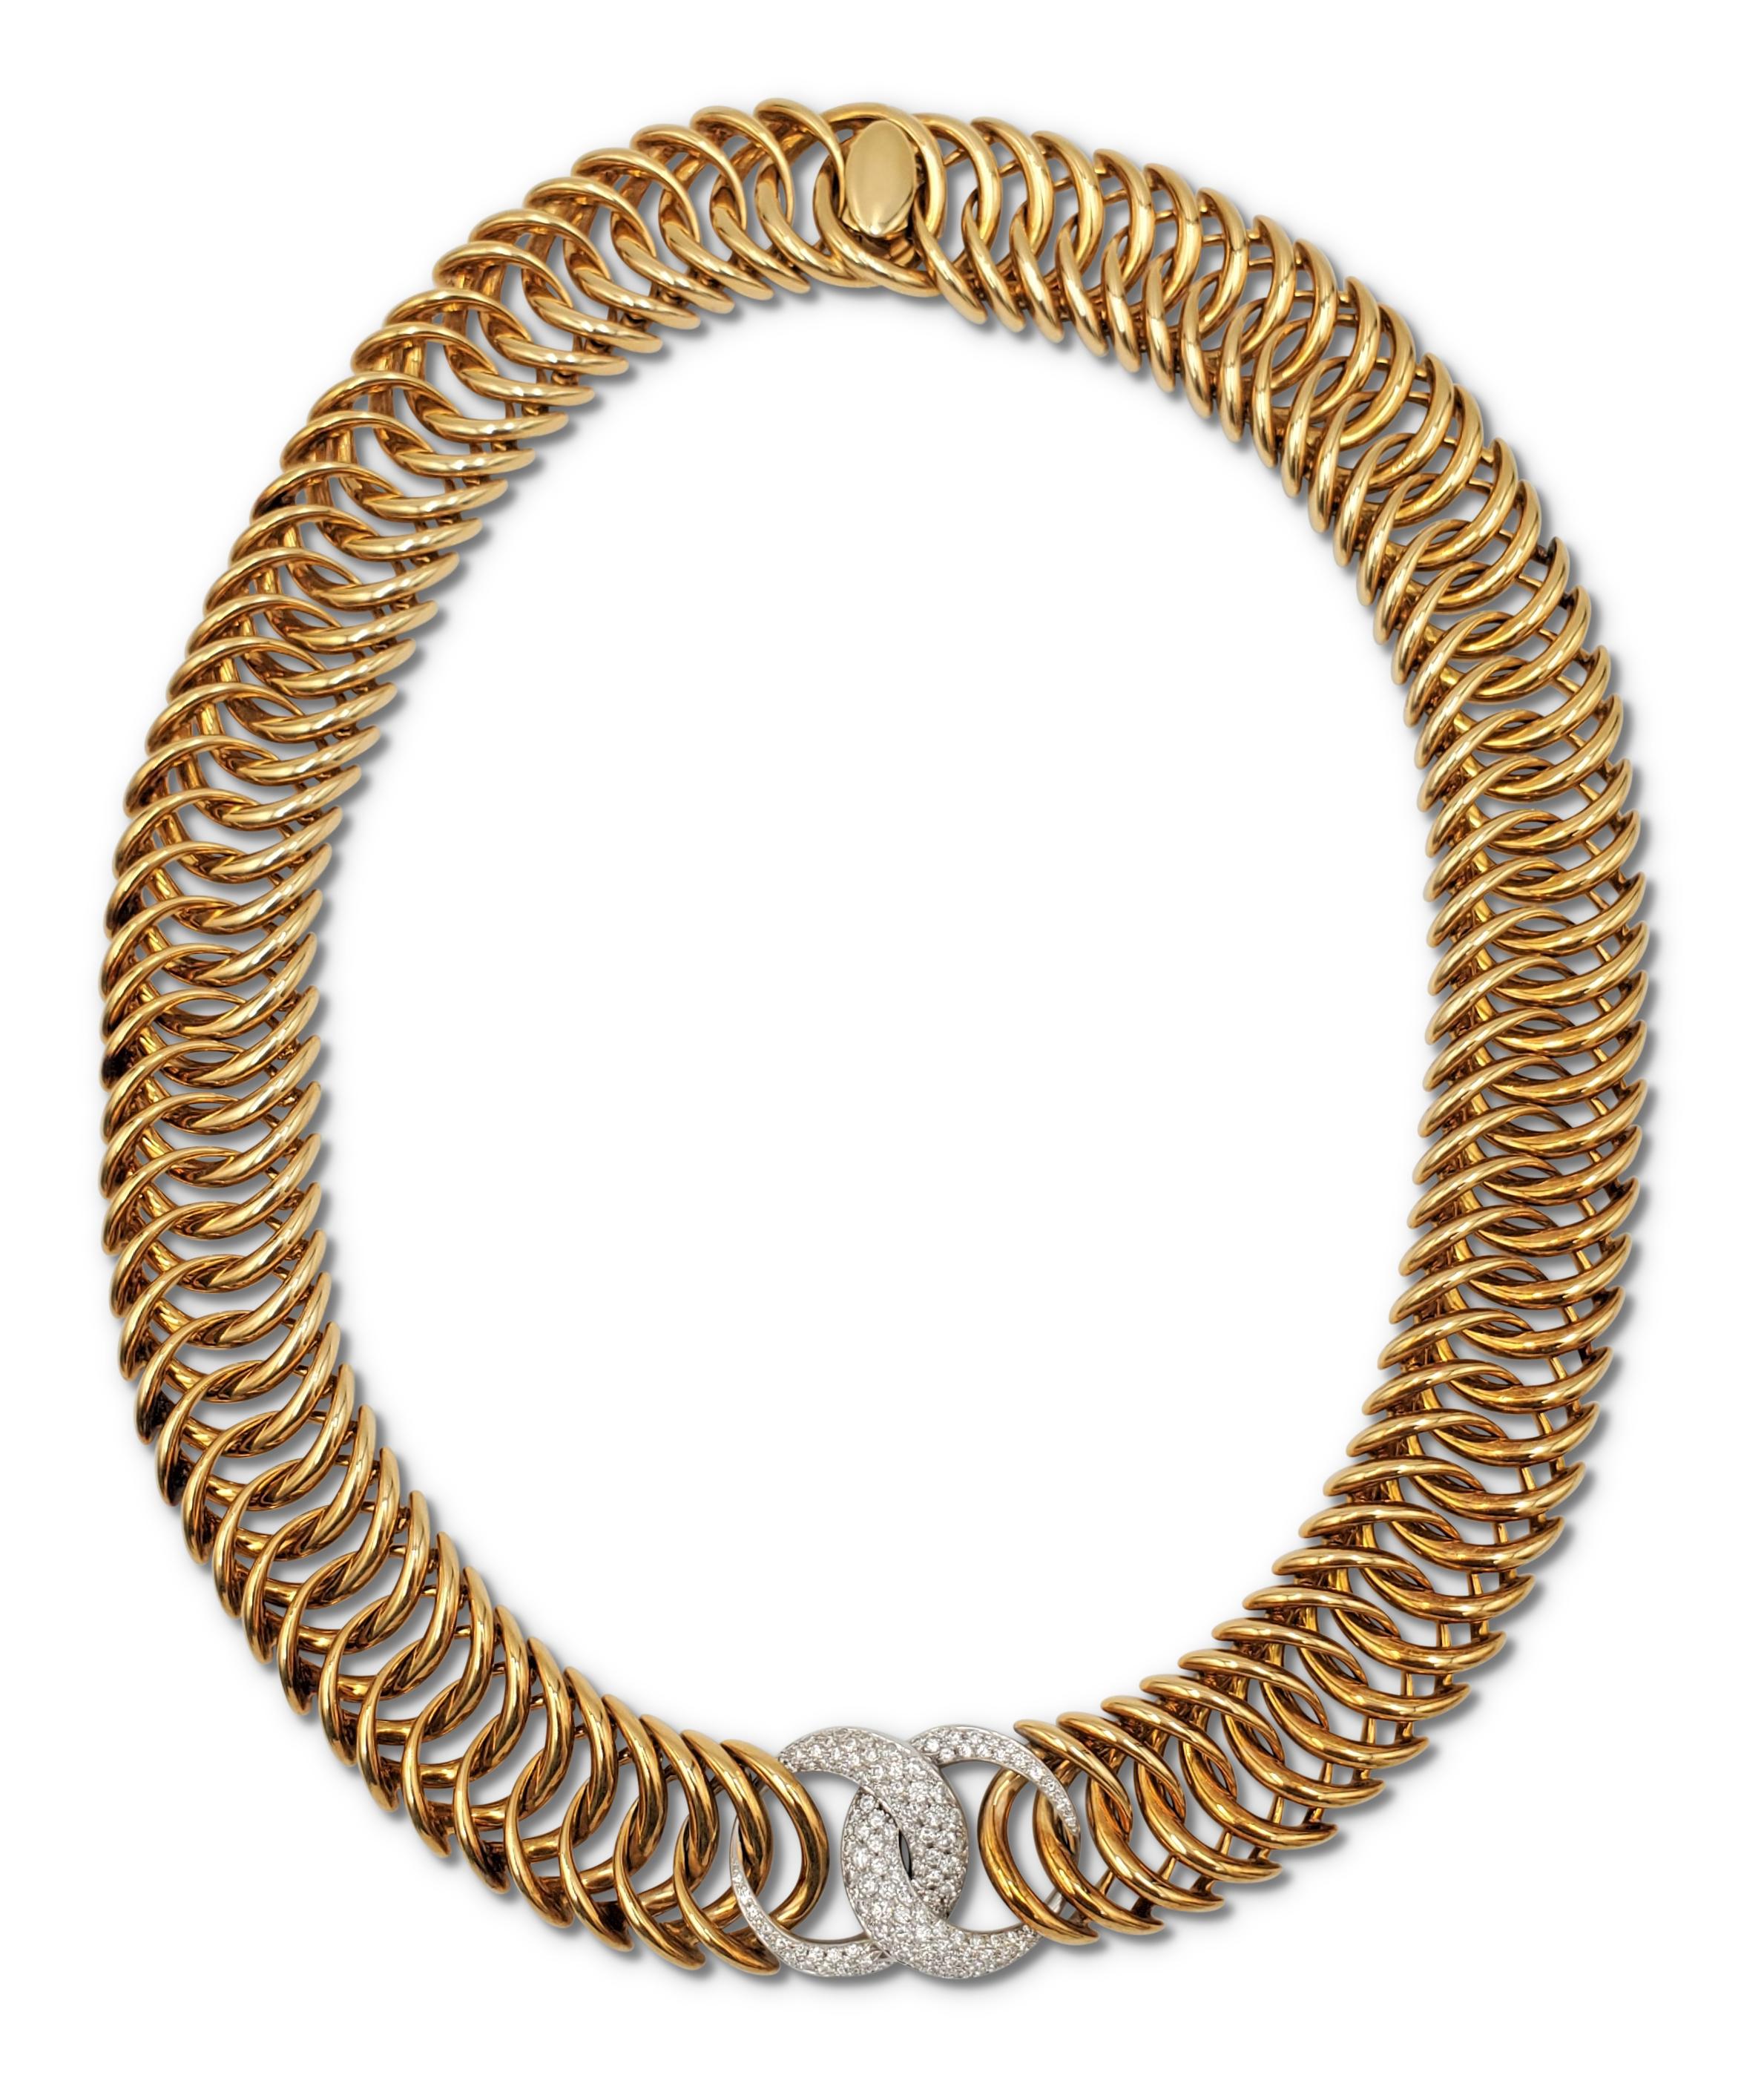 Verdura 'Double Crescent' necklace centers on two interlocking crescent-shaped links set with an estimated 2.01 carats of high quality round brilliant cut diamonds (E-F color, VS) set in white gold, connecting with polished 18 karat yellow gold